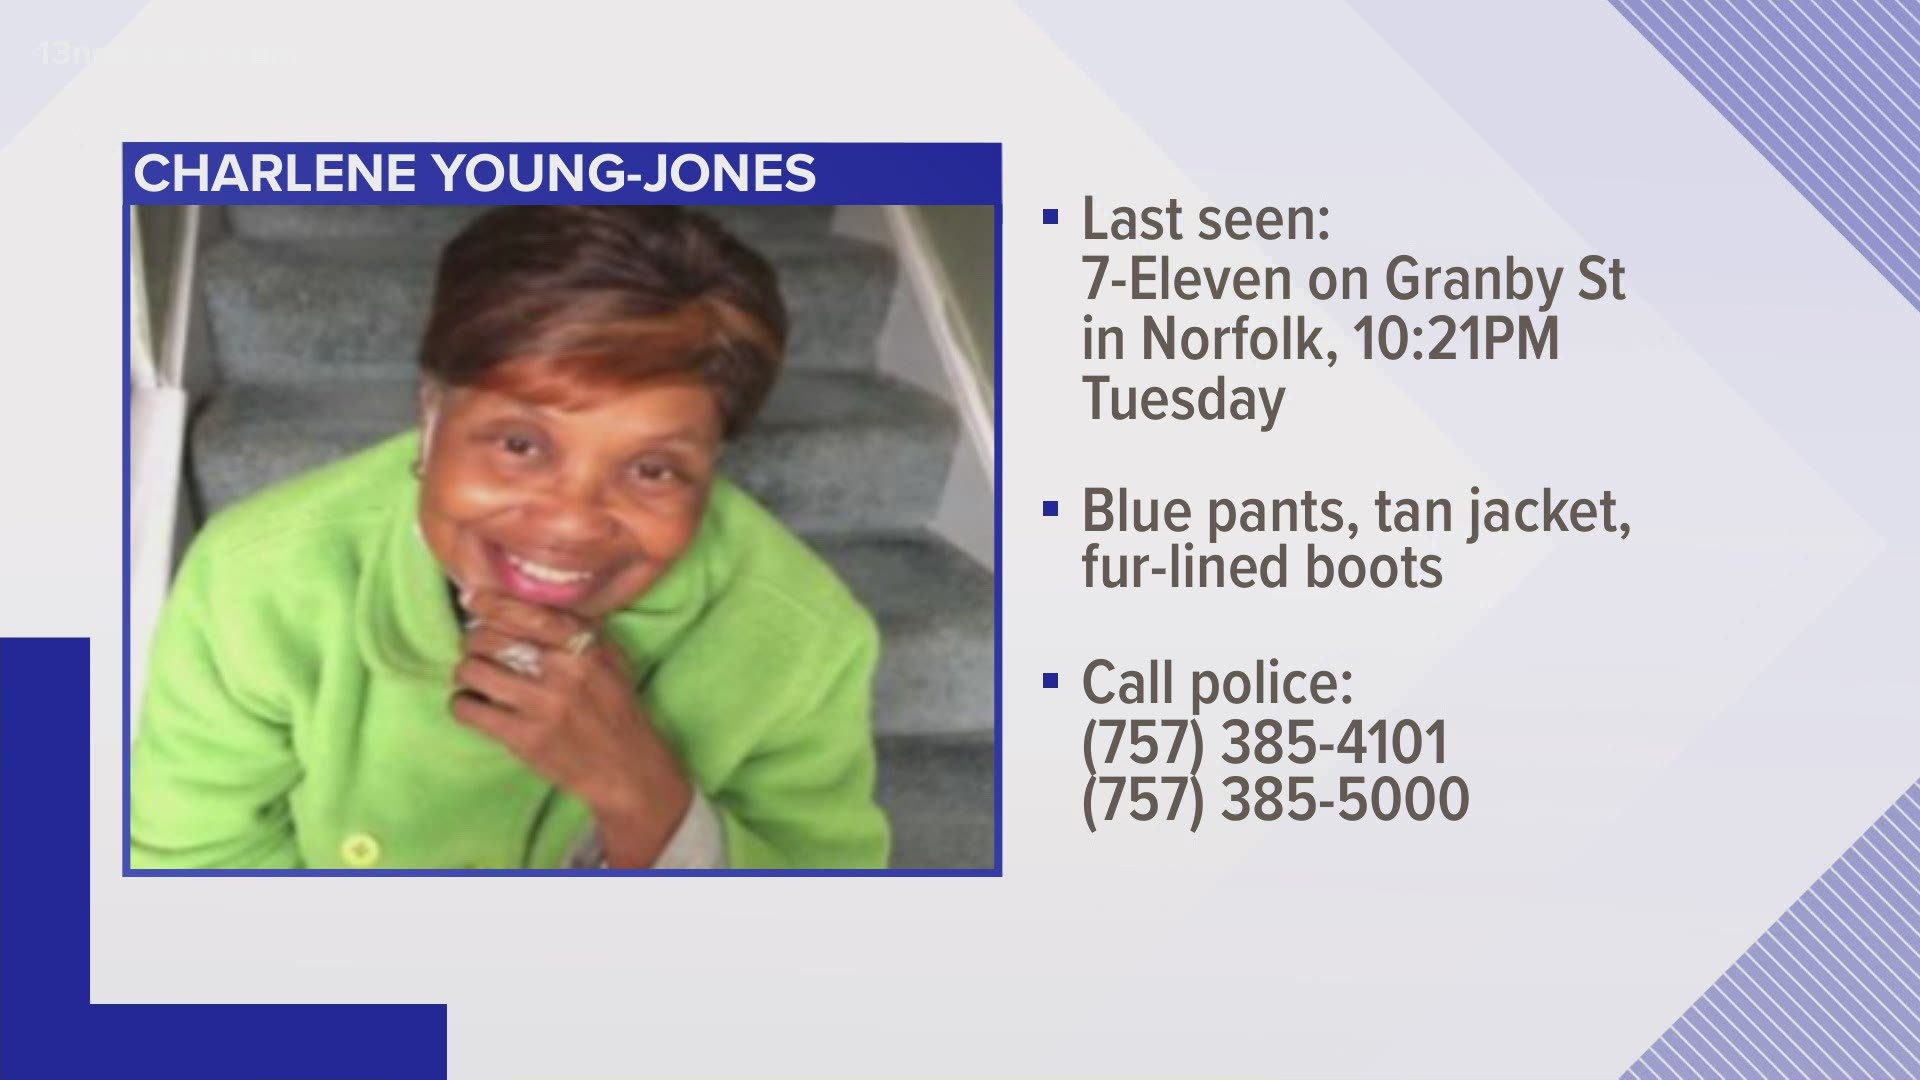 Virginia Beach Police said Charlene Young-Jones last was seen Tuesday night at a Norfolk 7-Eleven.